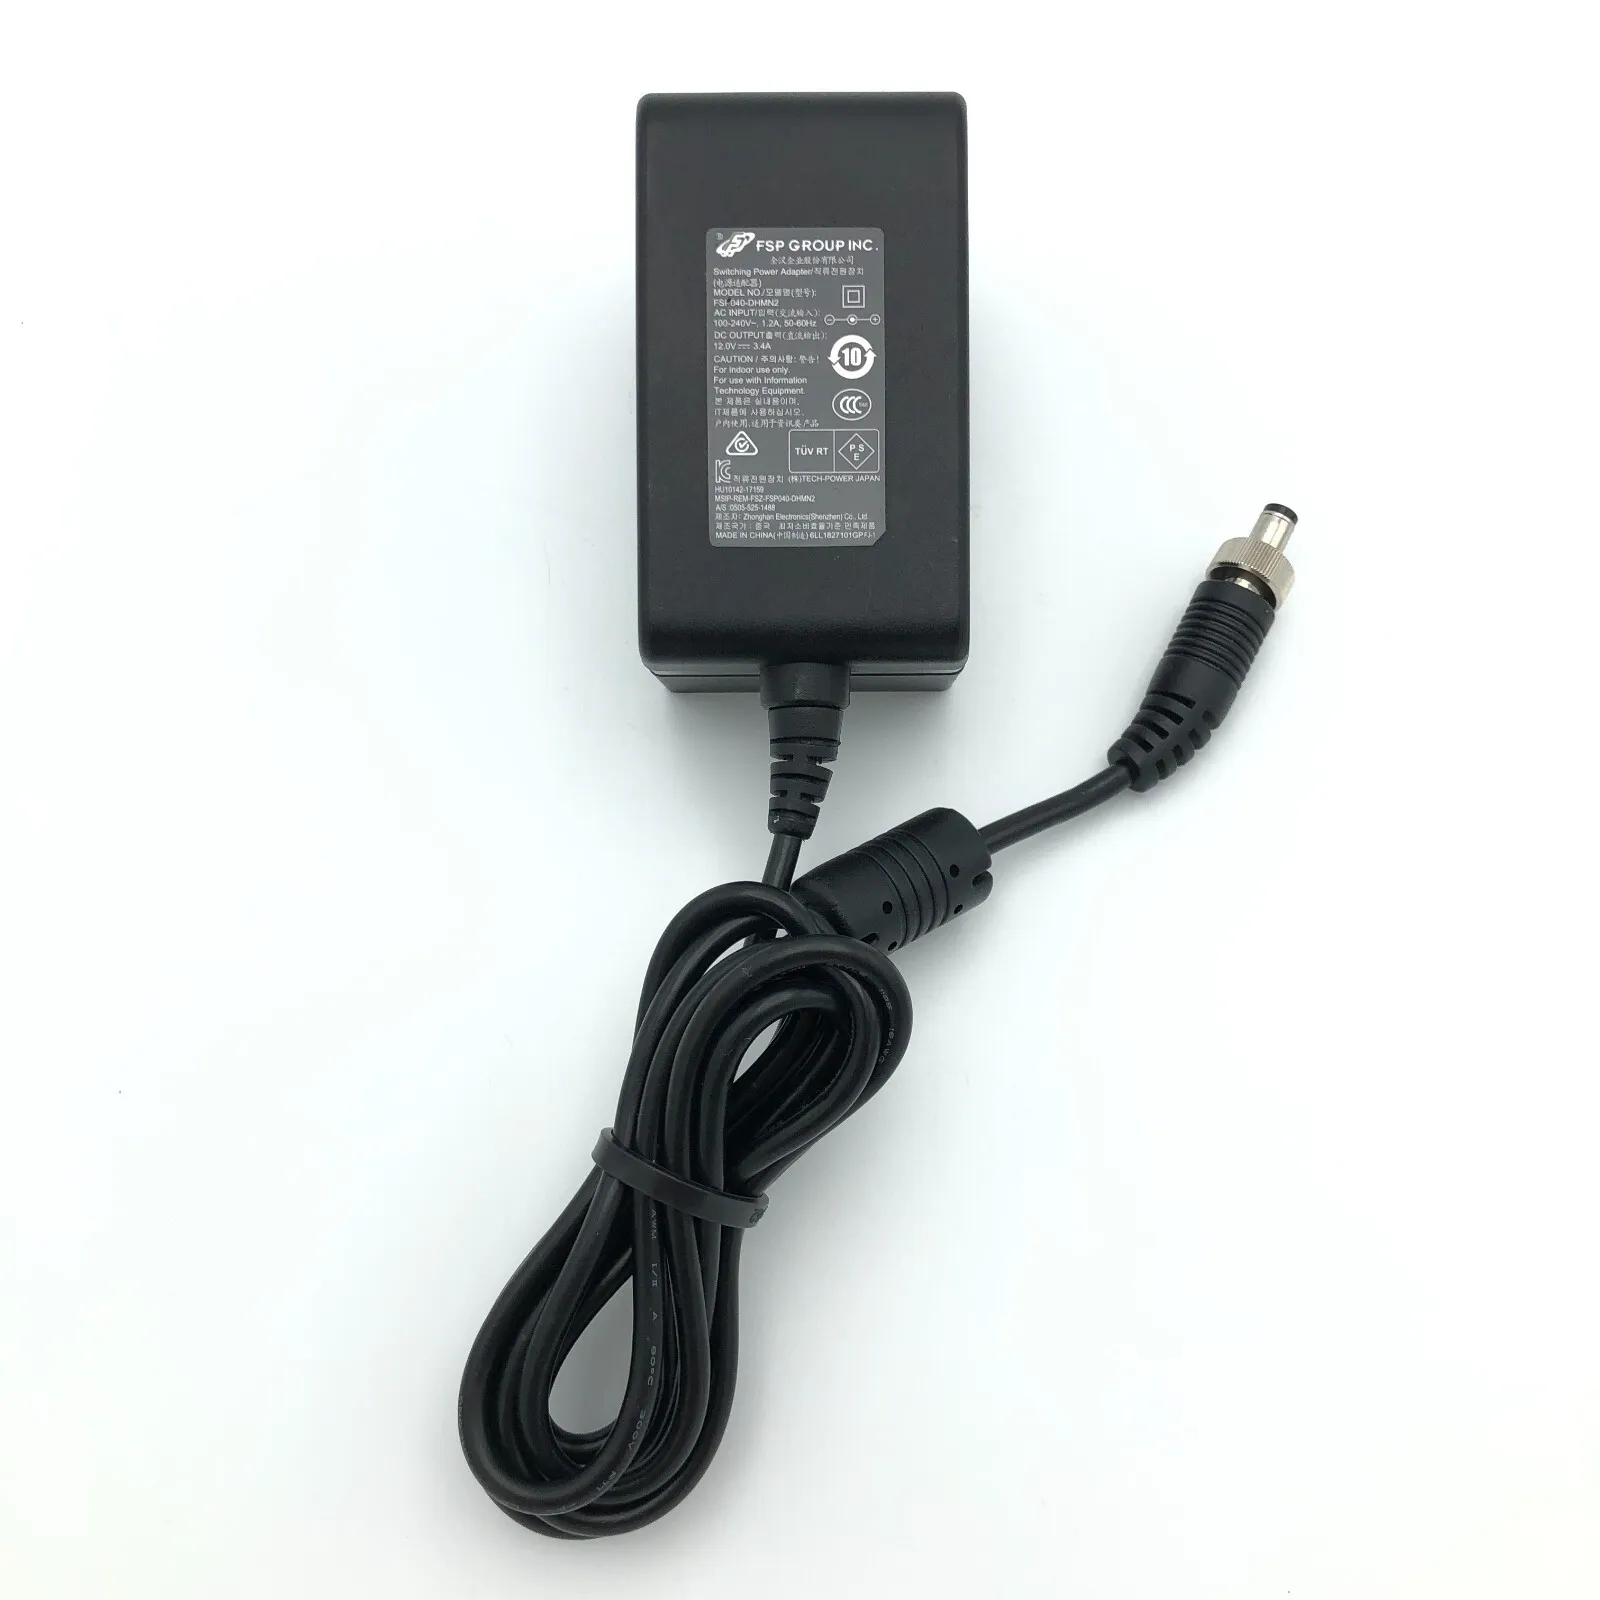 *Brand NEW*Genuine FSP FSP040-DHMN2 12V 3.4A 40W AC/DC Switching Adapter Wall Power Supp